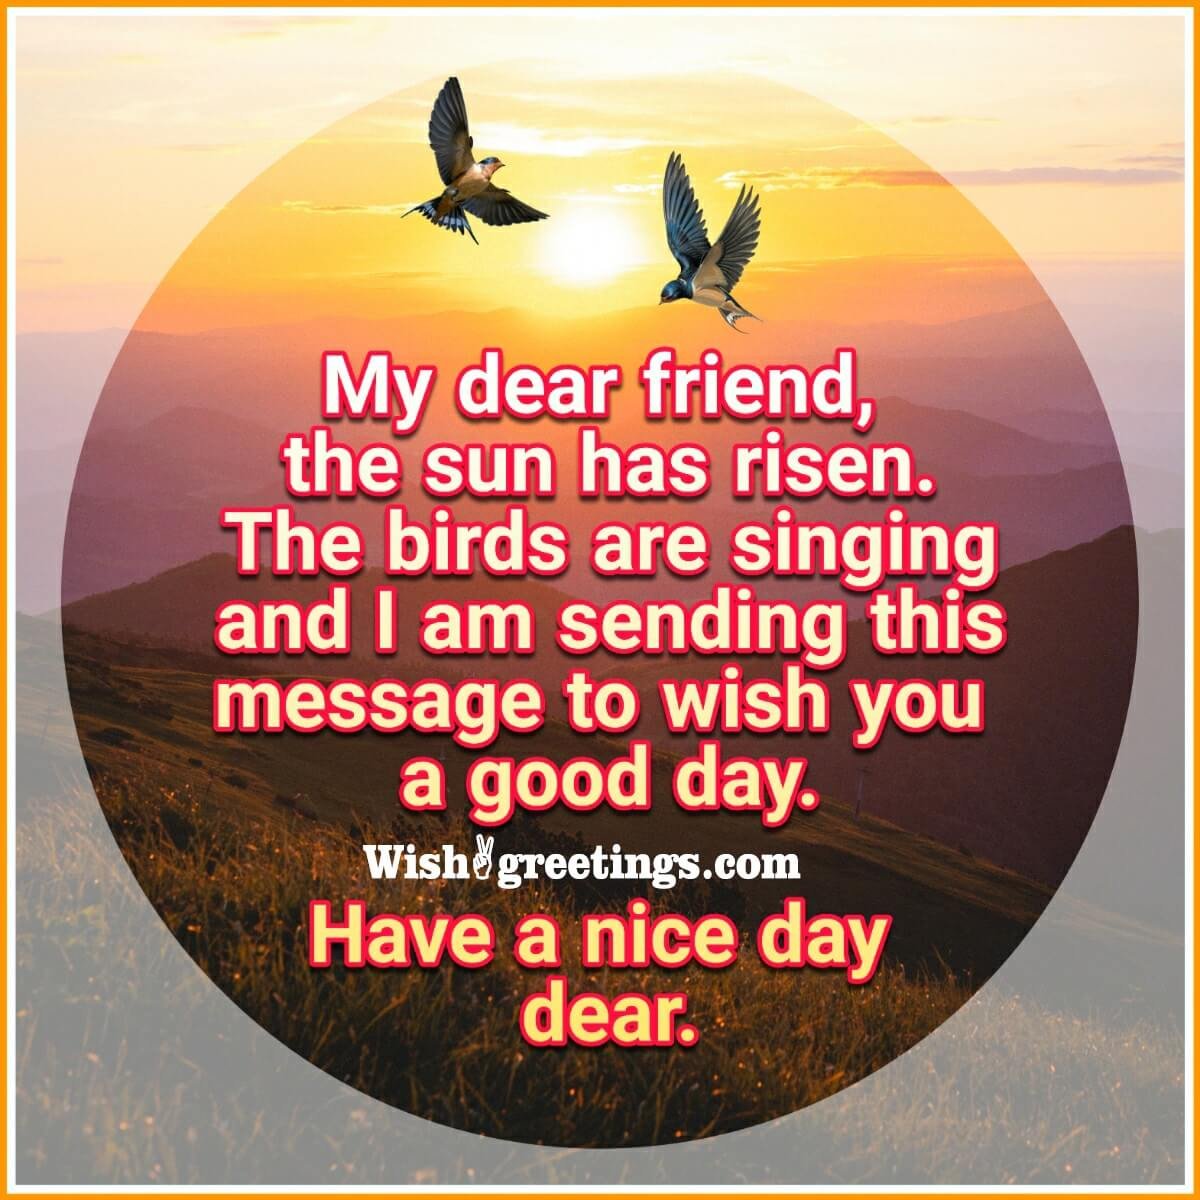 A Good Day Wish For Friend